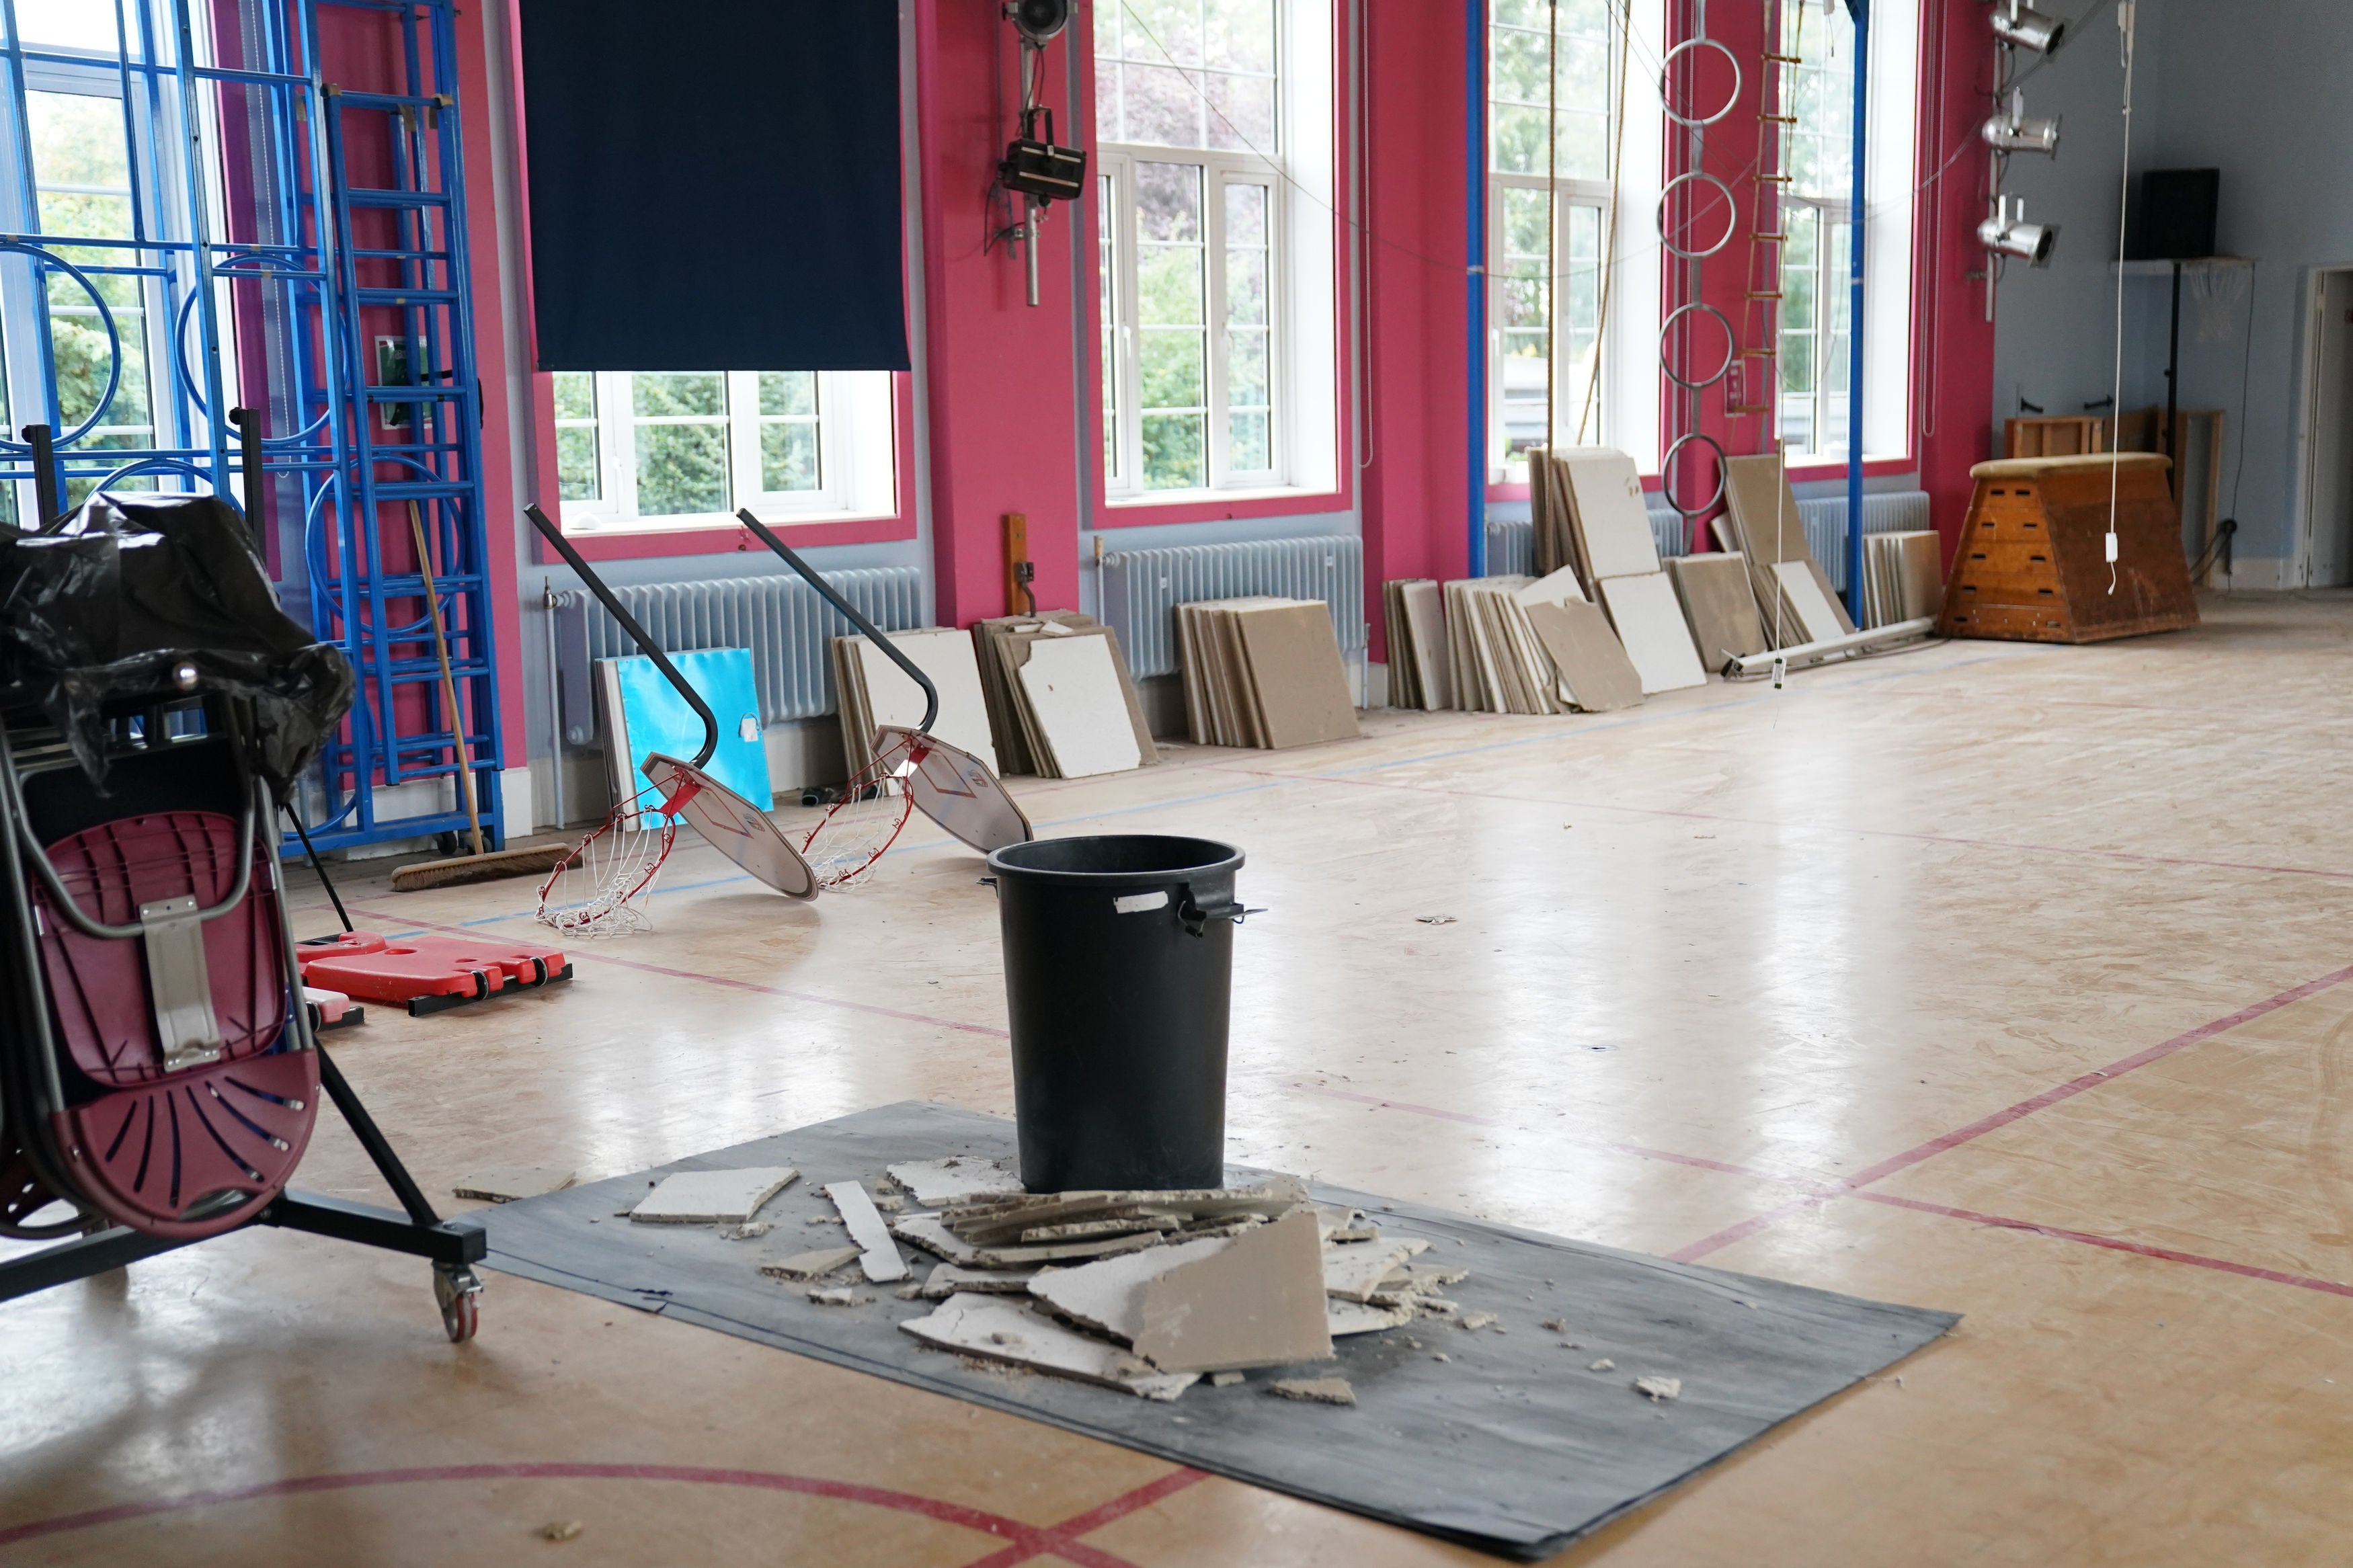 Damage inside Parks Primary School in Leicester, which has been affected by RAAC